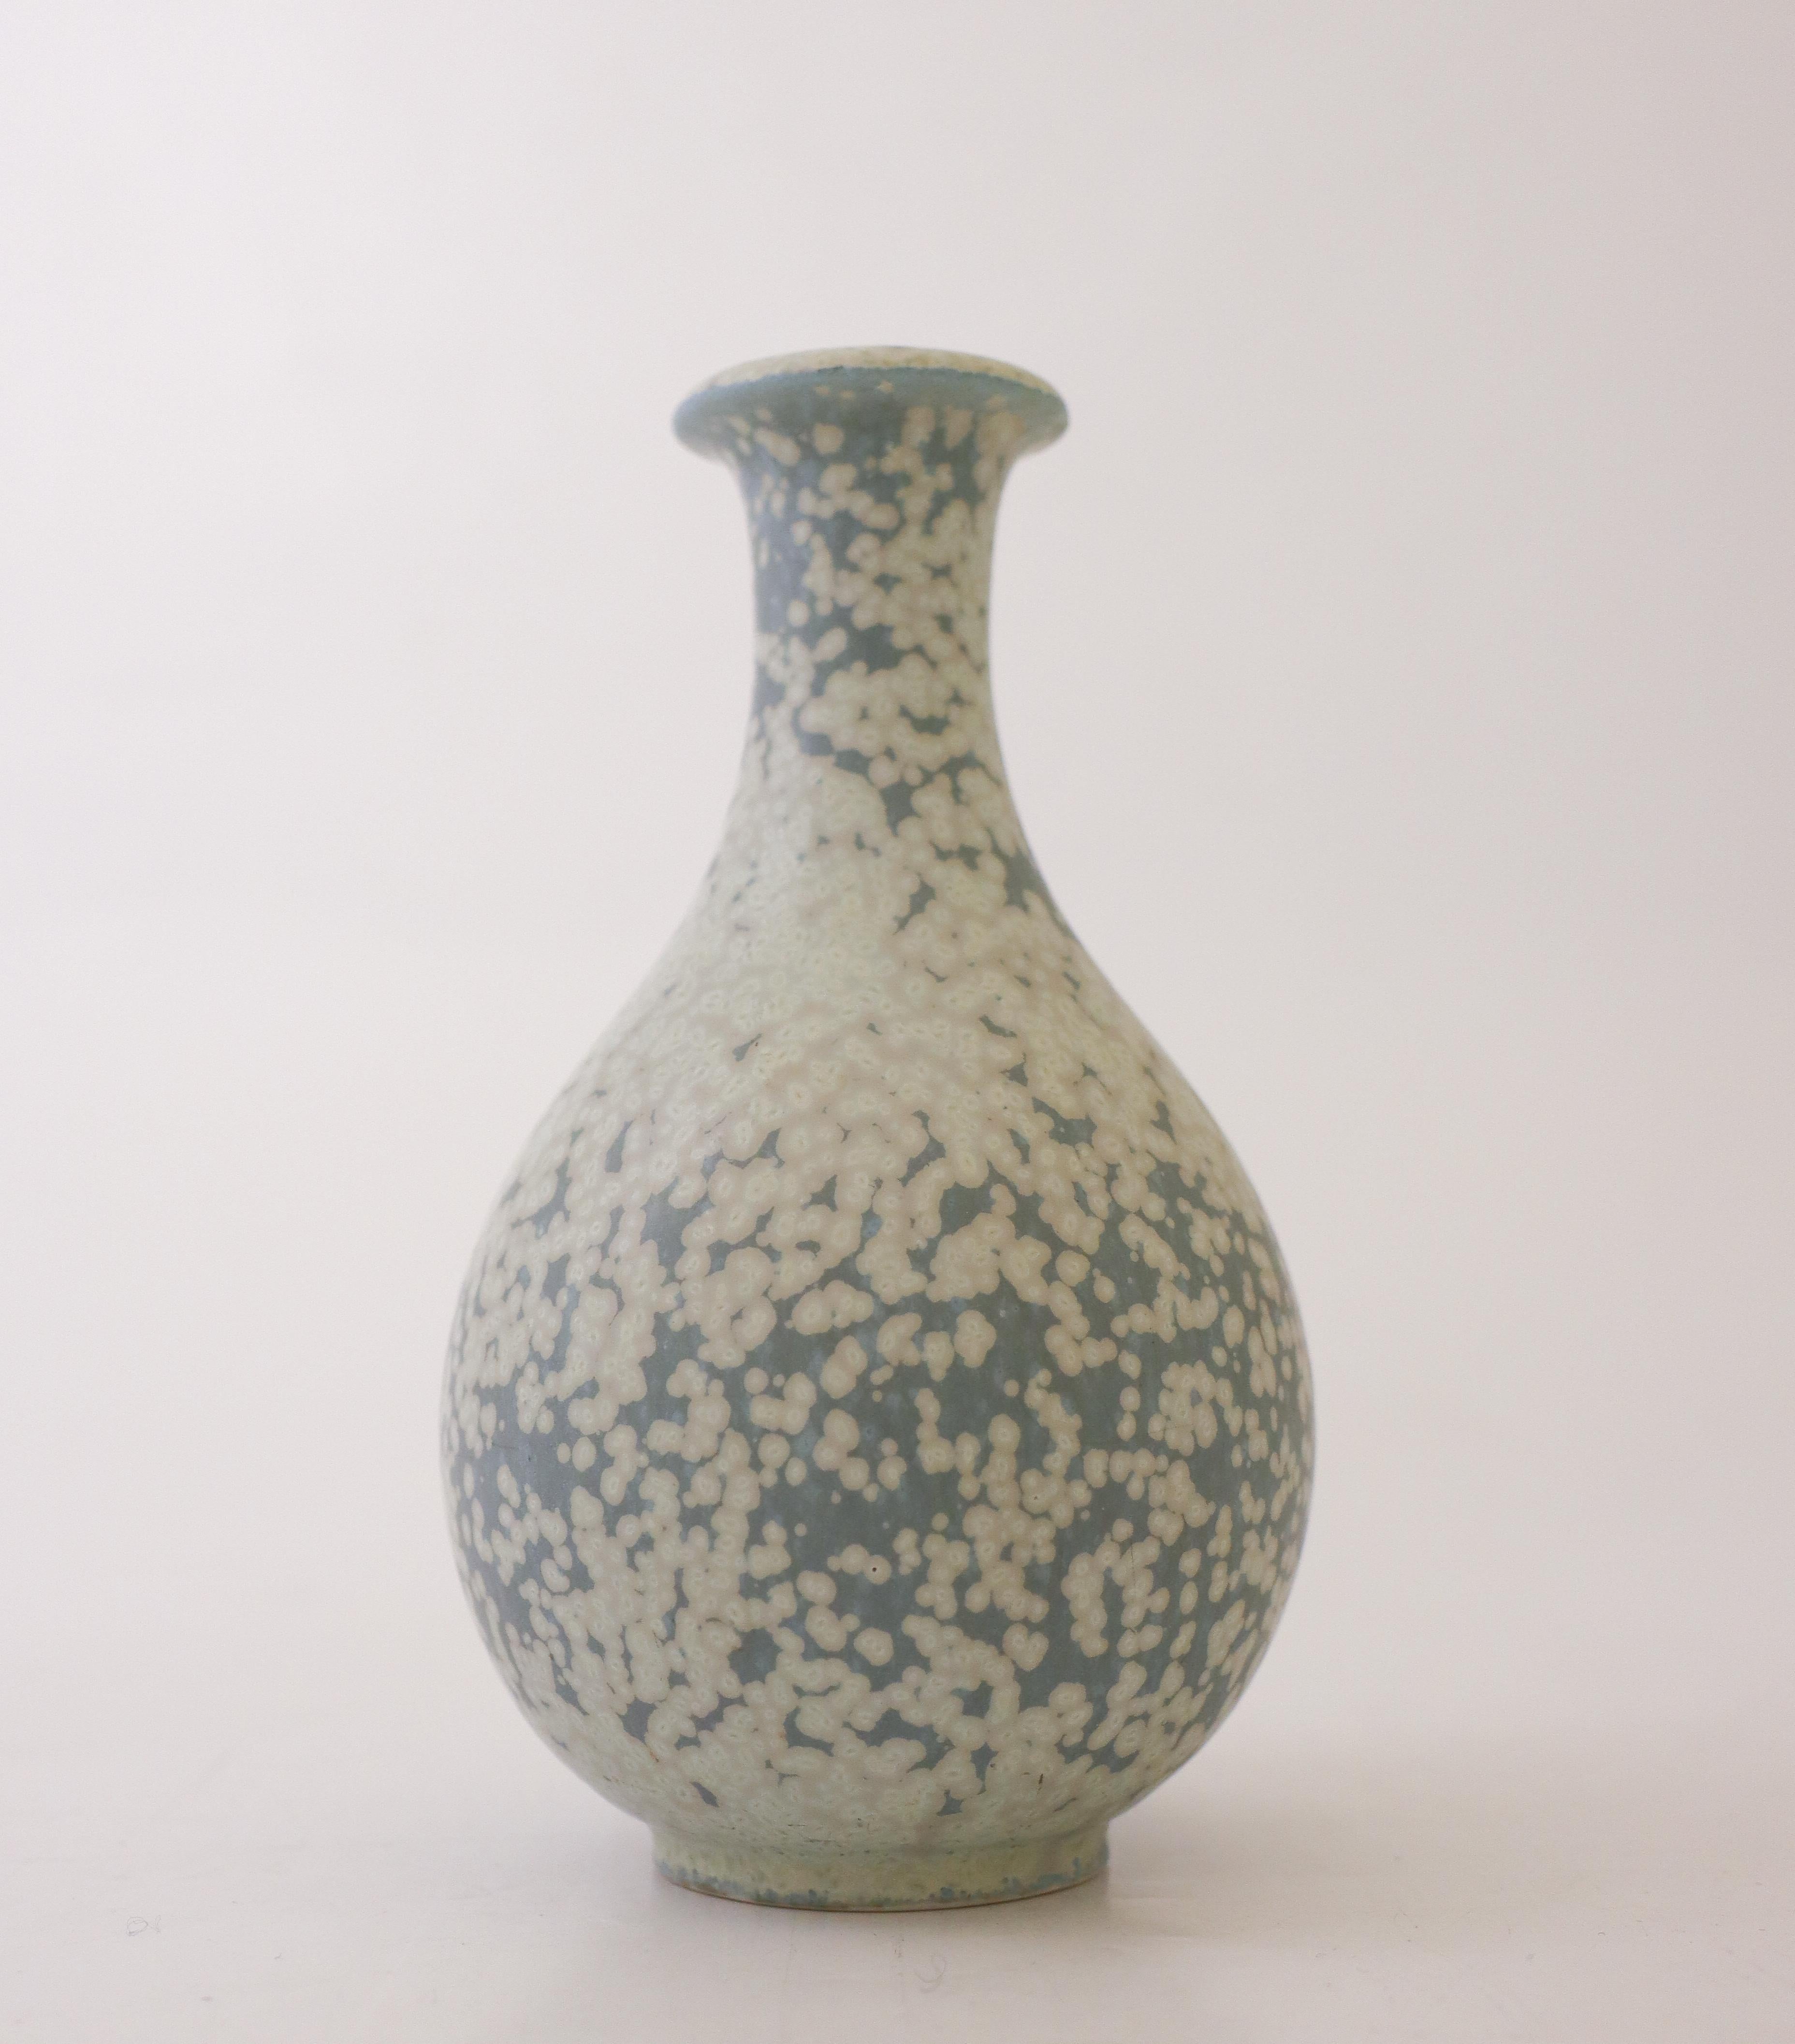 A lovely gray/blue speckled vase designed by Gunnar Nylund at Rörstrand, the vase is 14.5 cm (5.8